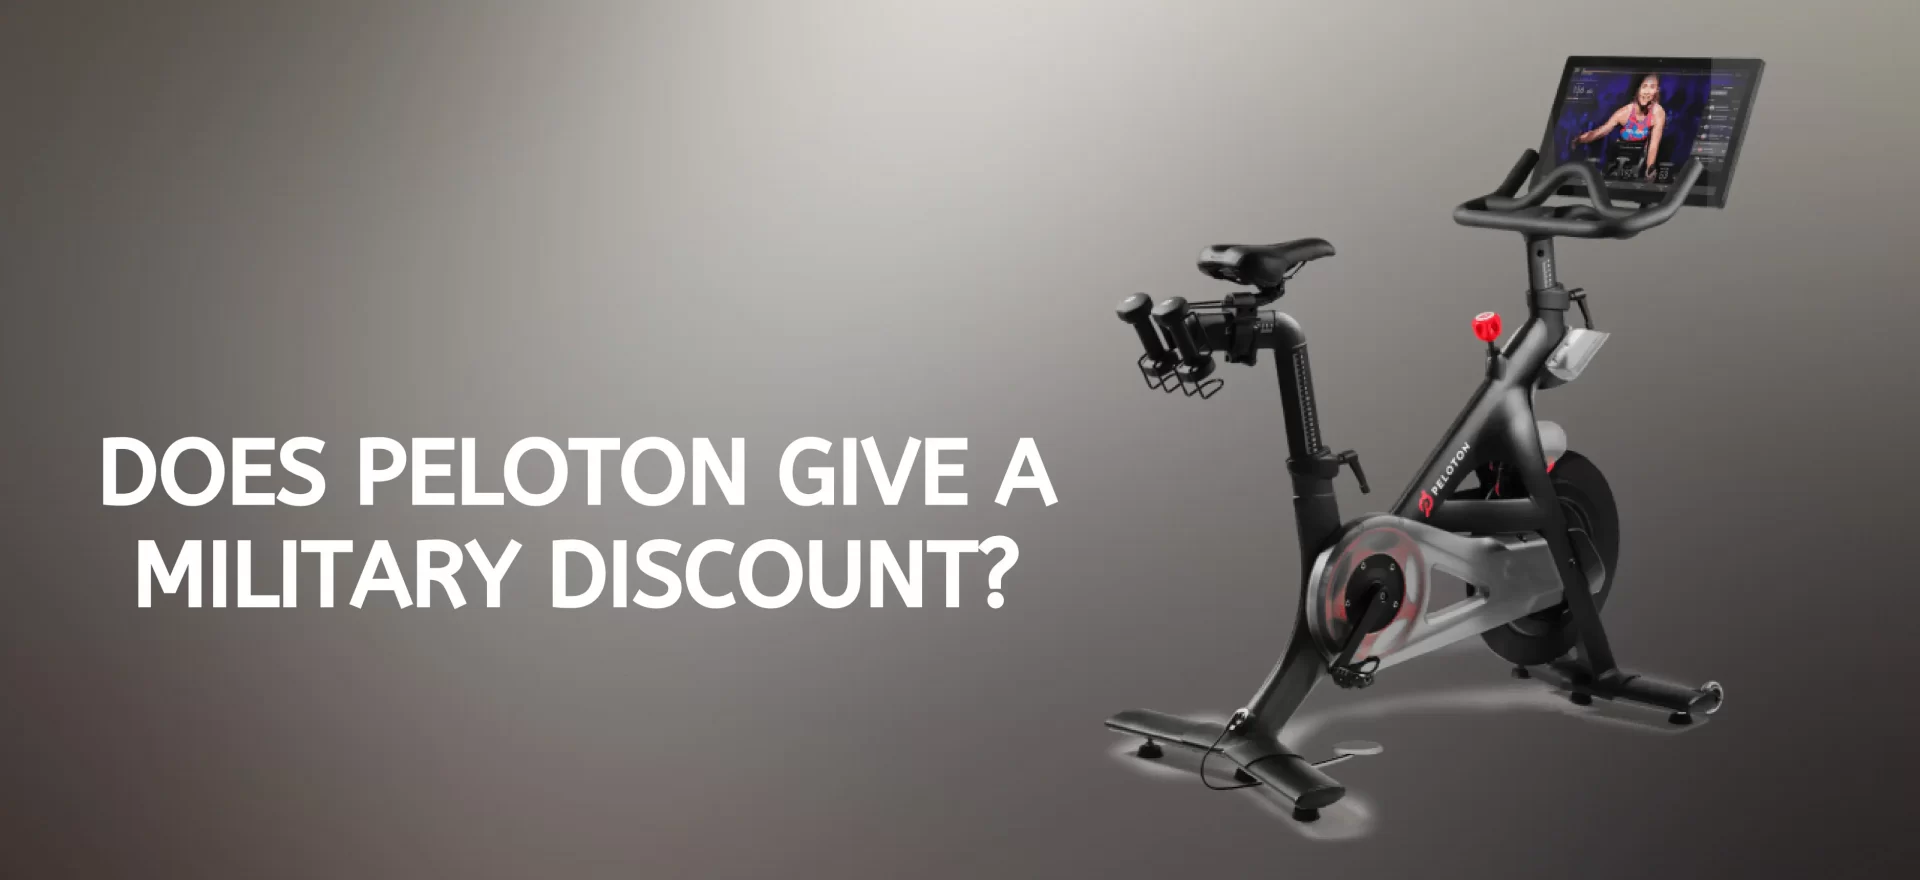 Does Peloton Give a Military Discount?